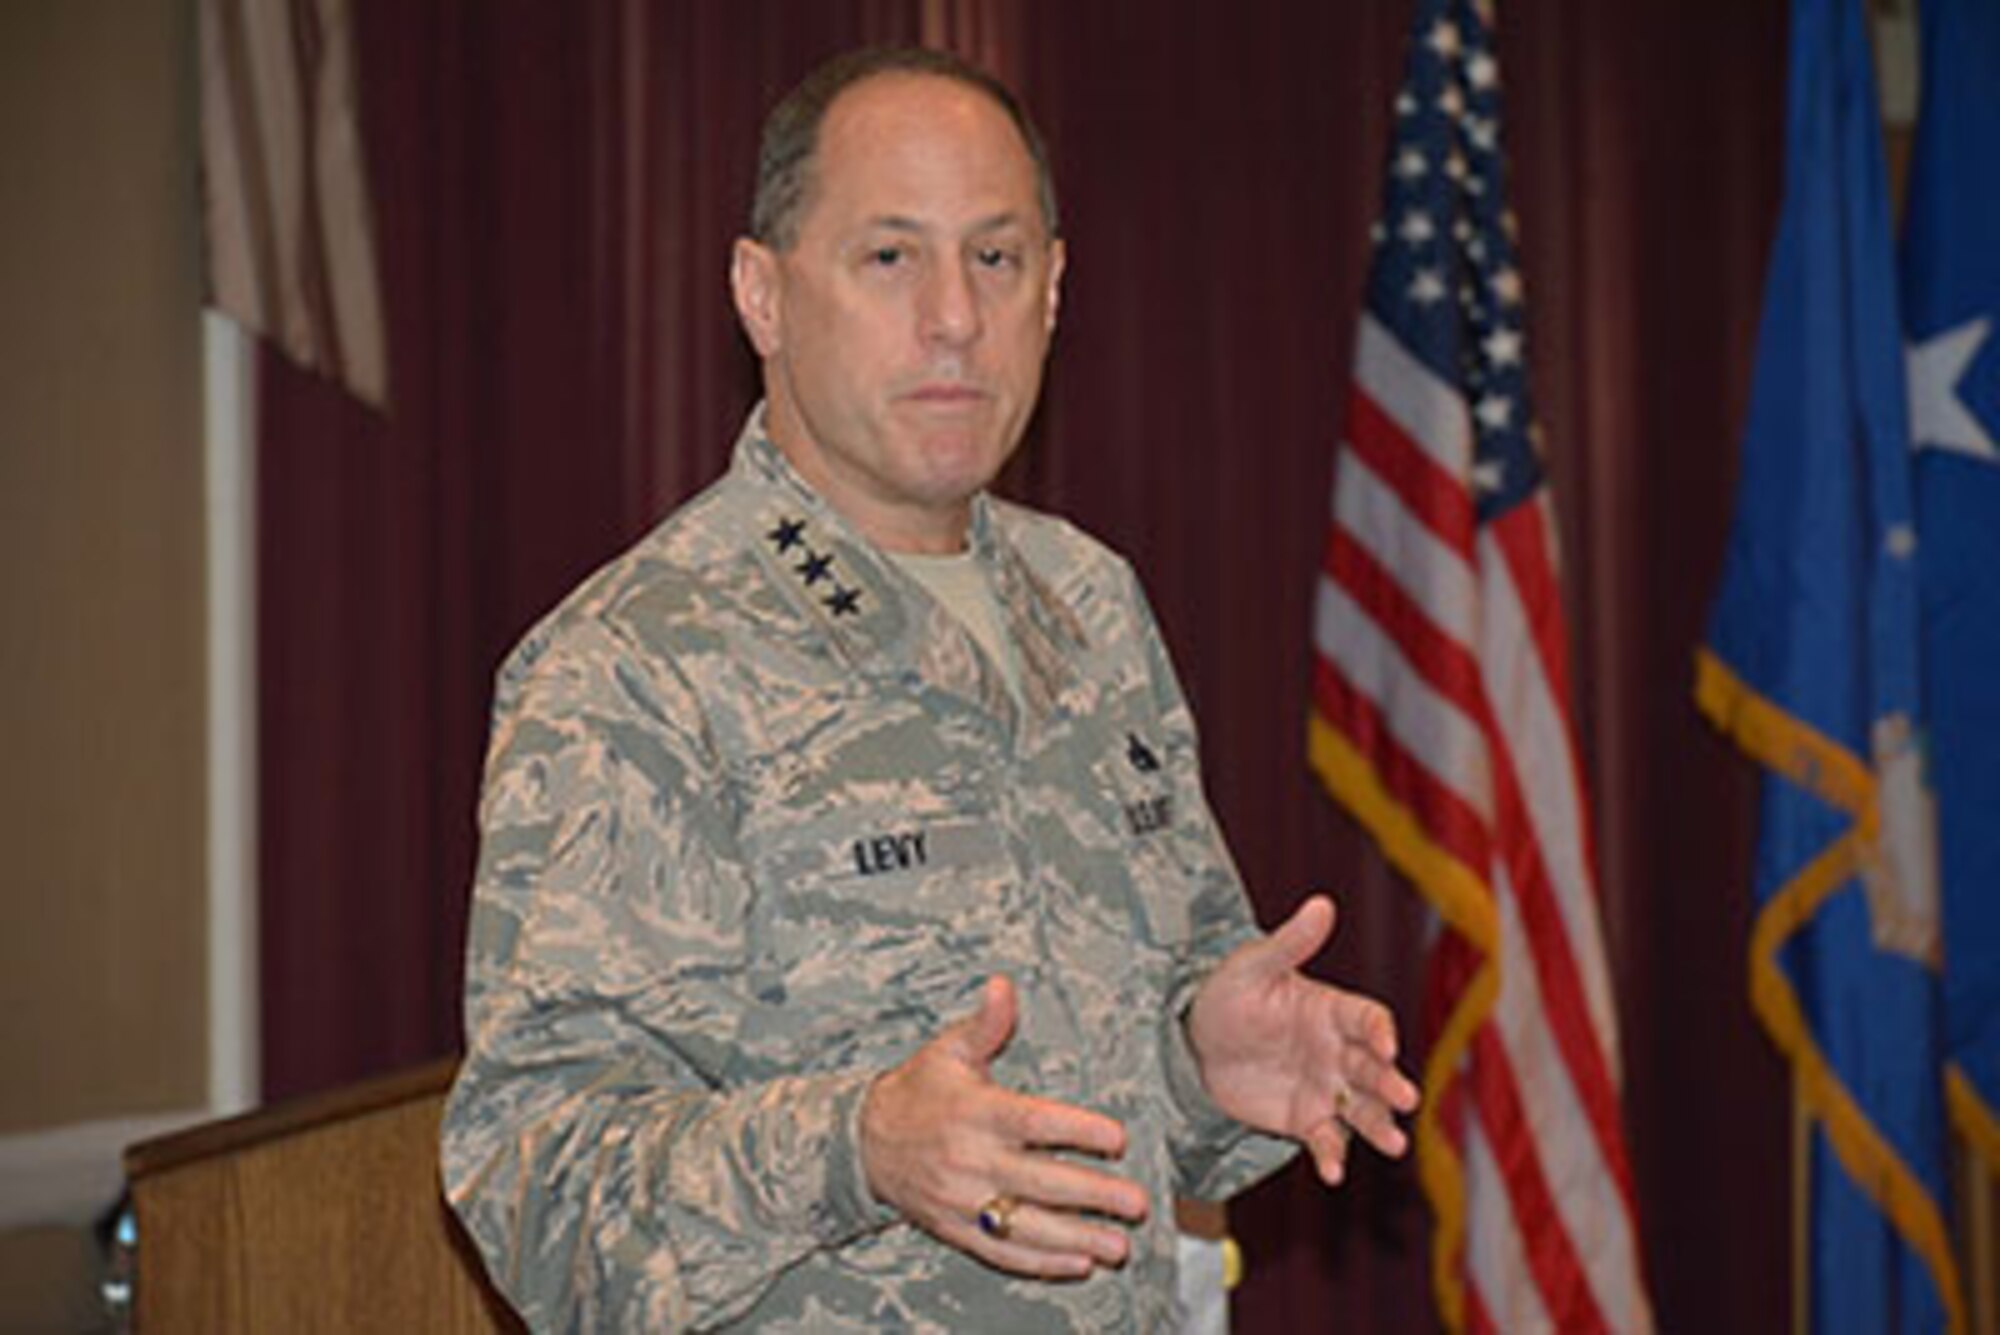 Lt. Gen. Lee K. Levy II, commander of the Air Force Sustainment Center, addresses audience members June 23 at the Air Force Association Gerrity Chapter awards breakfast at the Tinker Club. The lieutenant general said the United States must “scratch and claw every day” to keep the Air Force’s aerospace edge. (Air Force photo by Darren D. Heusel/Released)